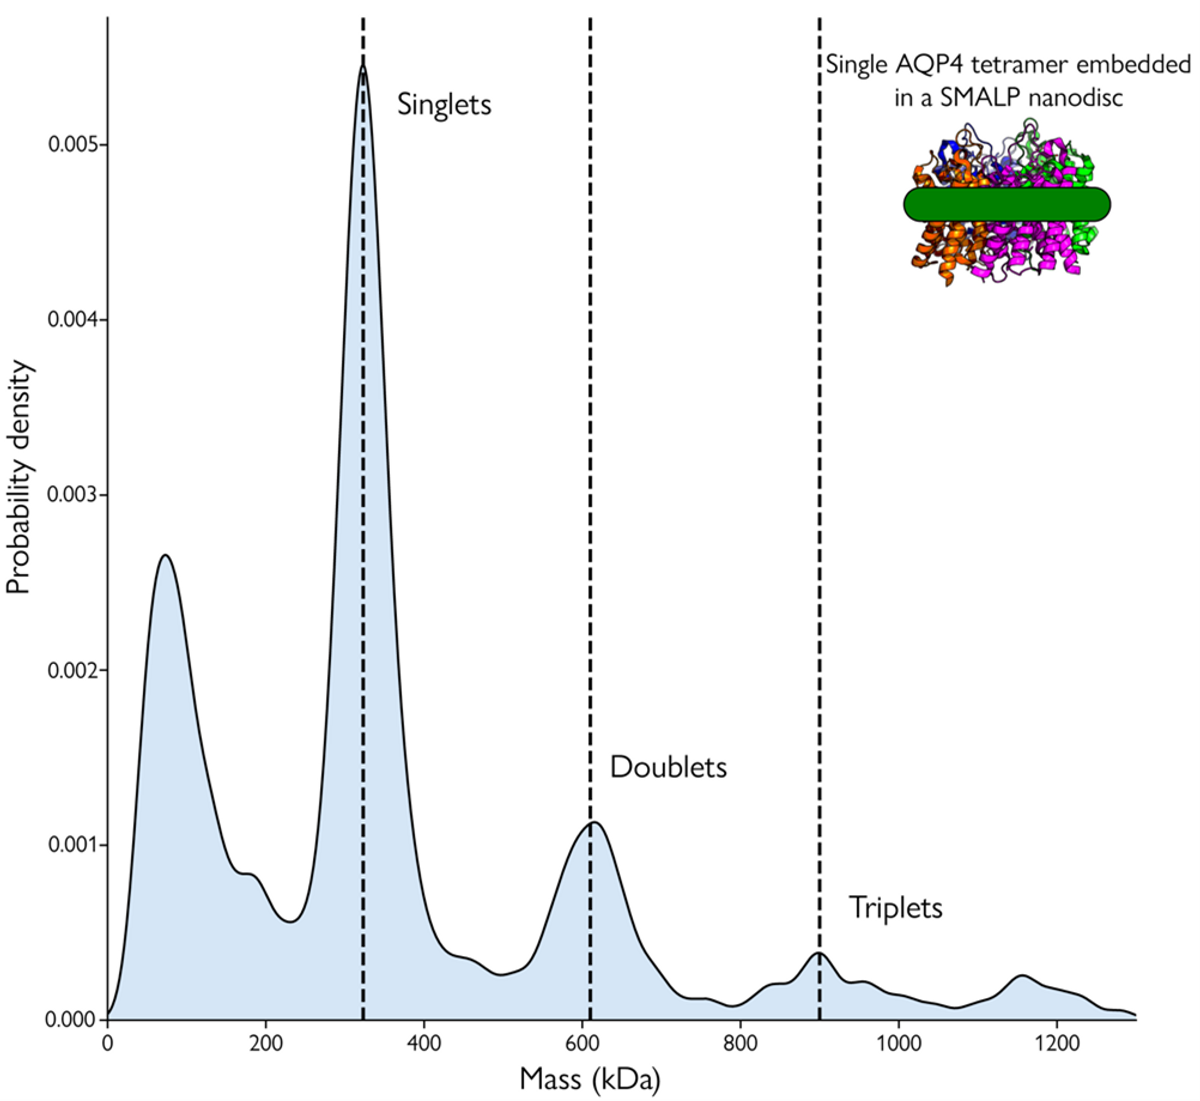 Mass photometry is compatible with membrane mimetics: Mass photometry measurement of ion channel aquaporin 4 (AQP4) sample solubilized using SMALPs. The mass peaks correspond to SMALPs carrying one (singlets), two (doublets), and three (triplets) AQP4 tetramers.